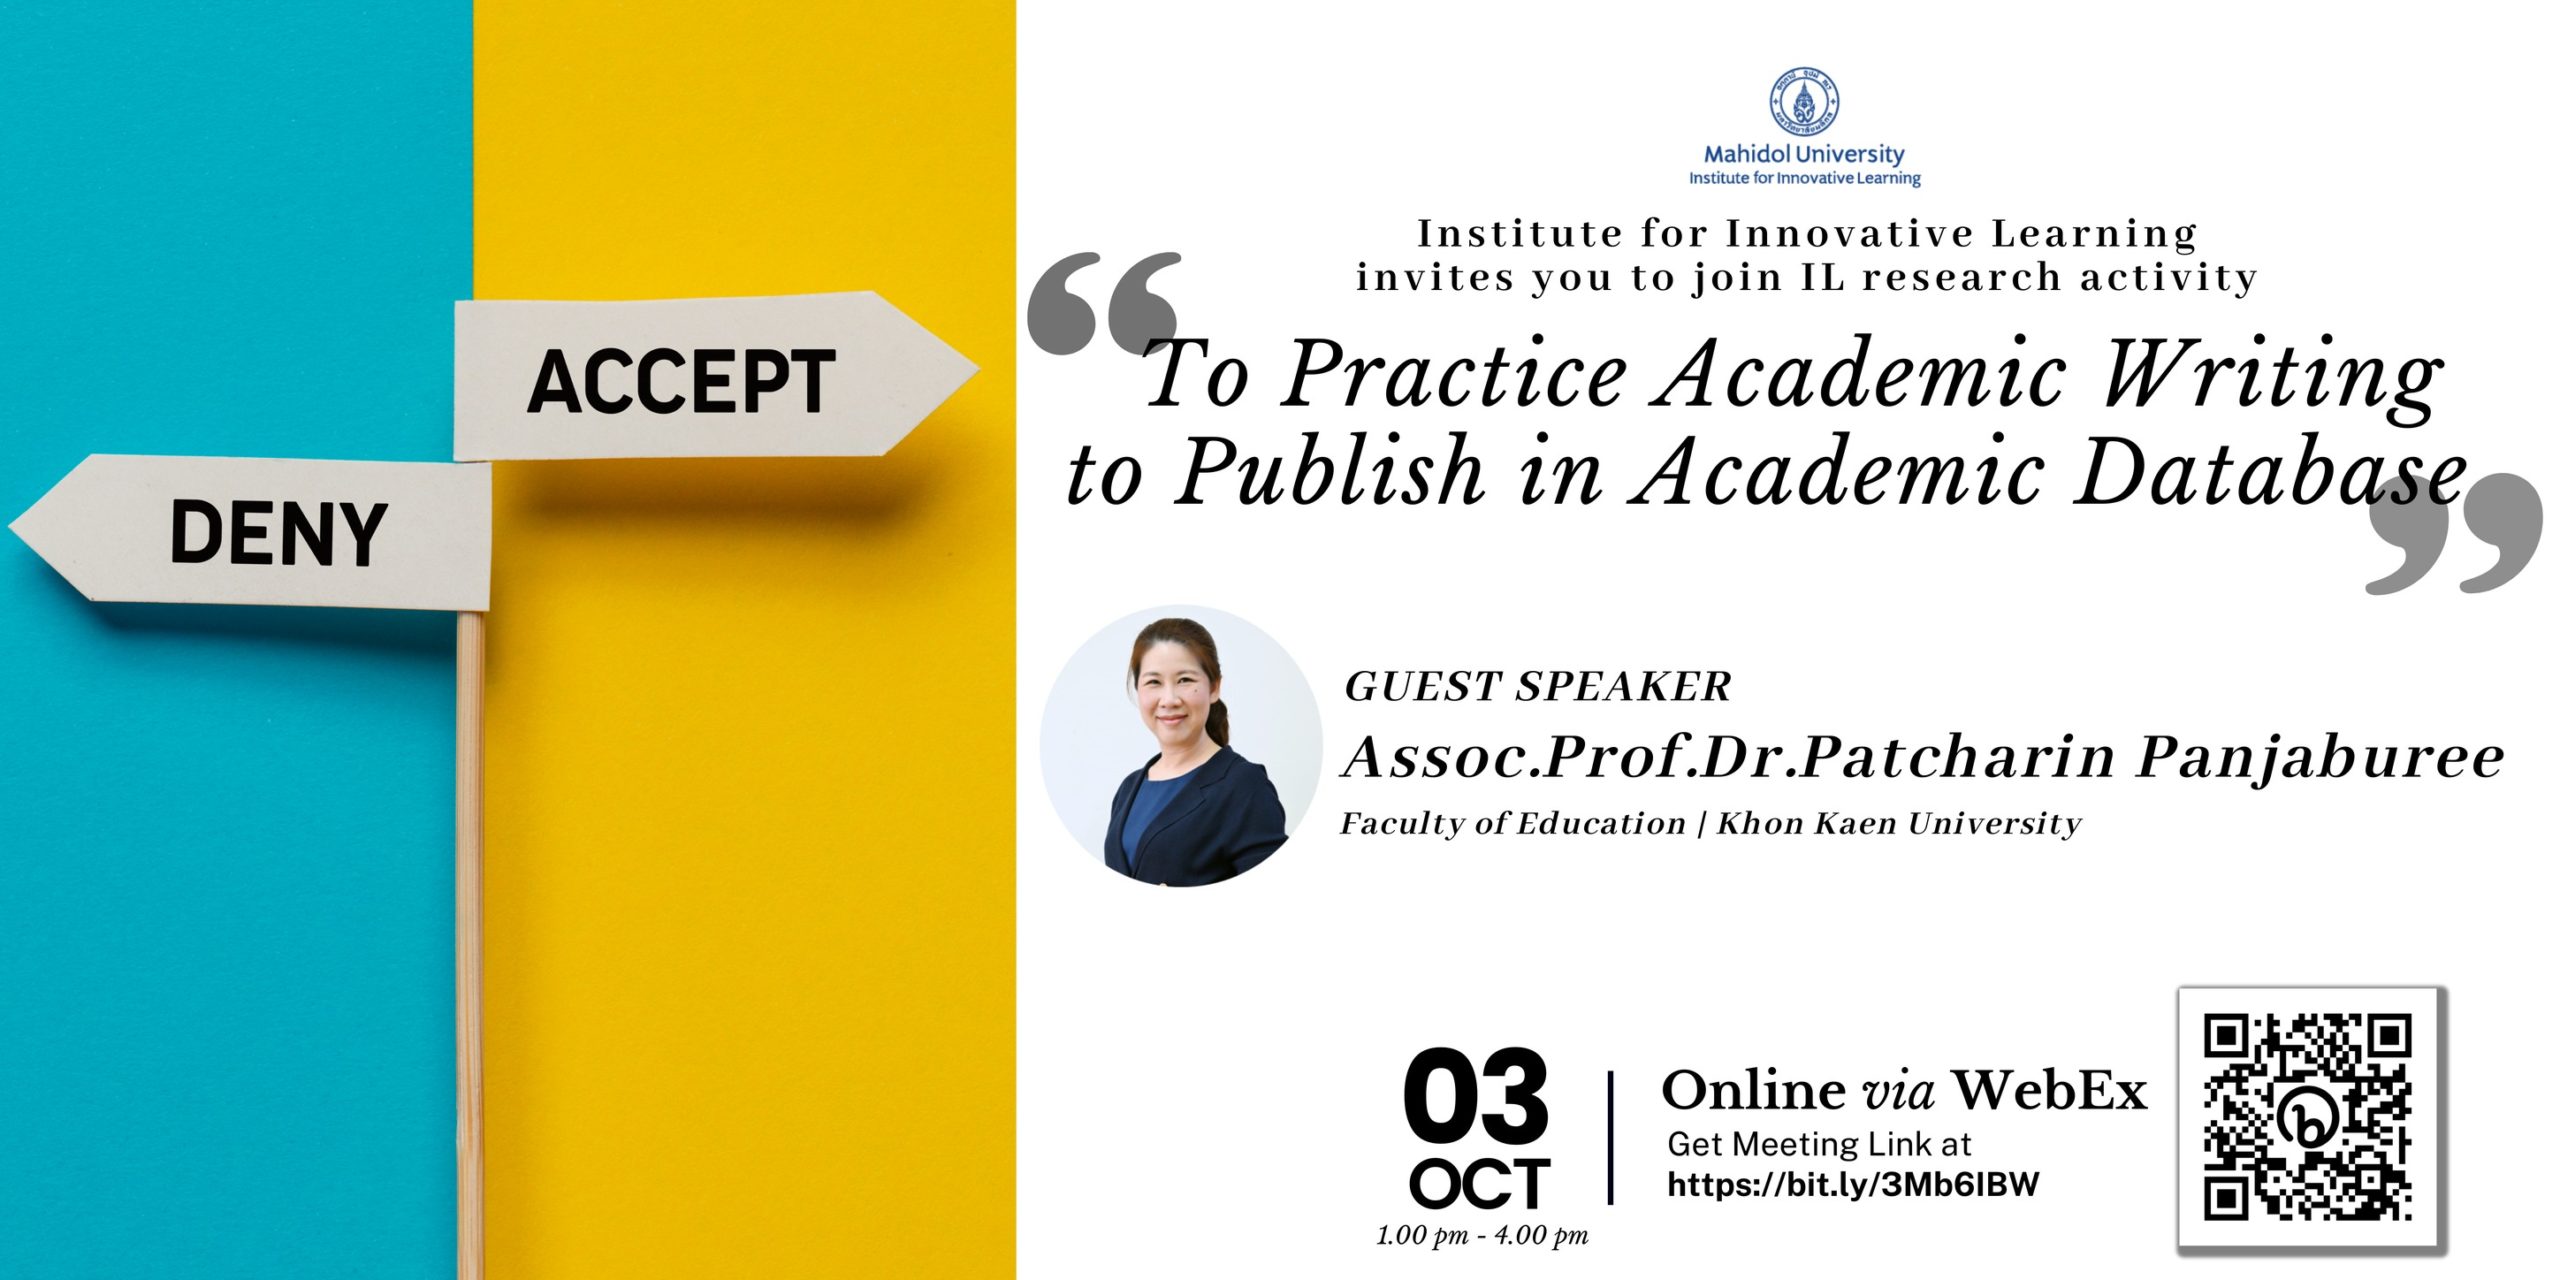 IL Research Activity “To Practice Academic Writing to Publish in Academic Database”